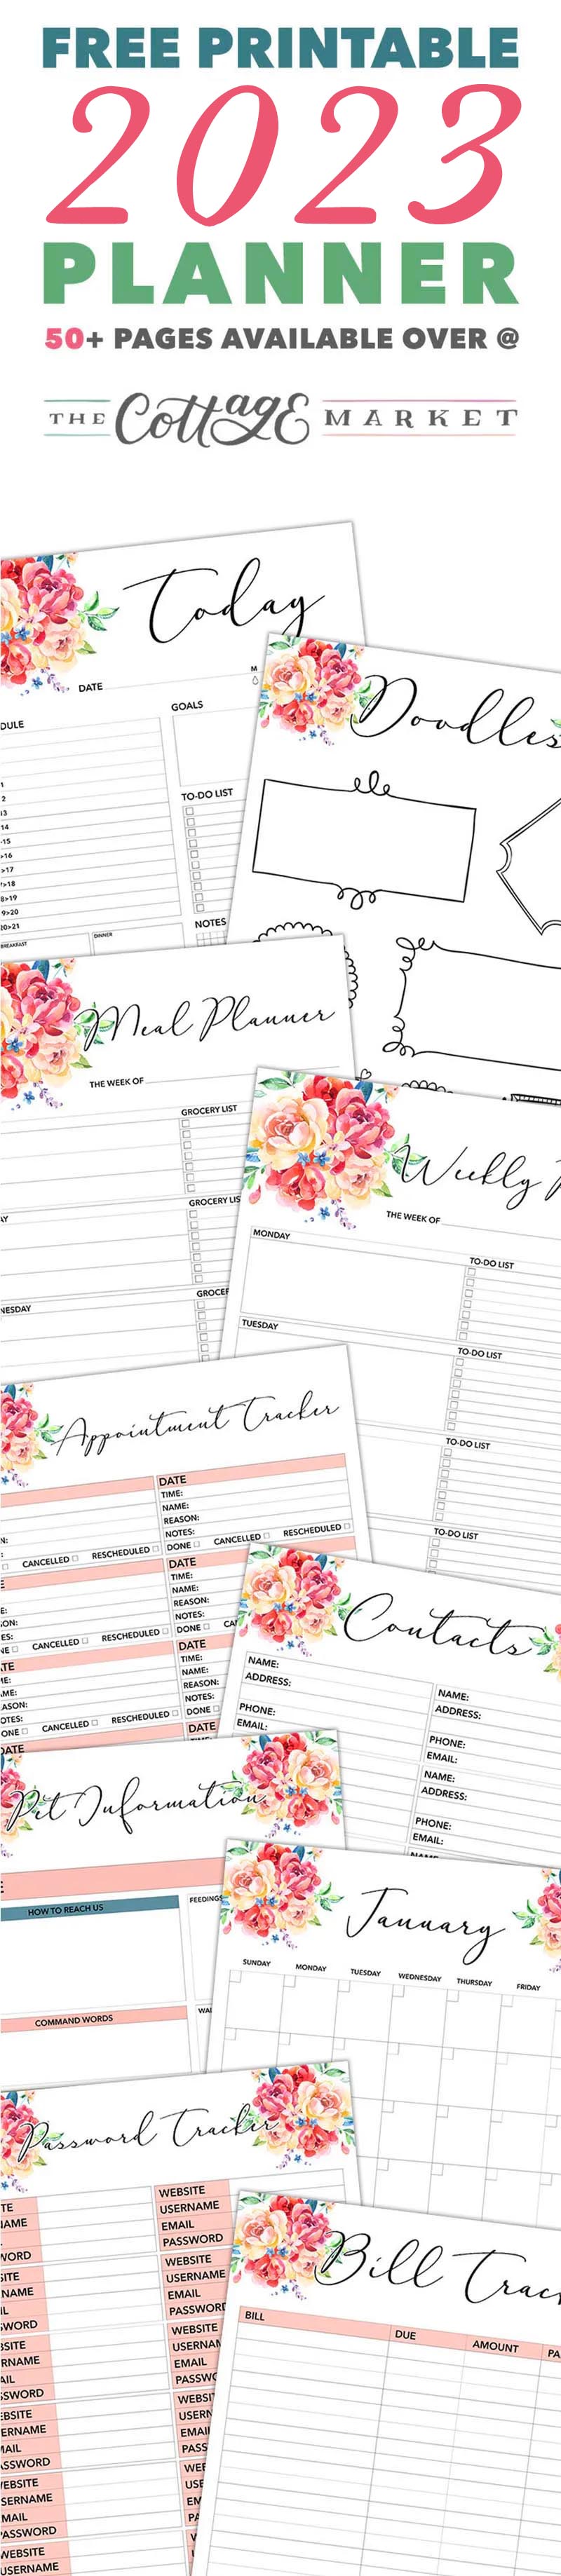 Here's your Free Printable 2023 Planner 50 Plus Printable Pages with a beautiful floral design! Your favorite for 2 years running! Here's to 2023 ENJOY!